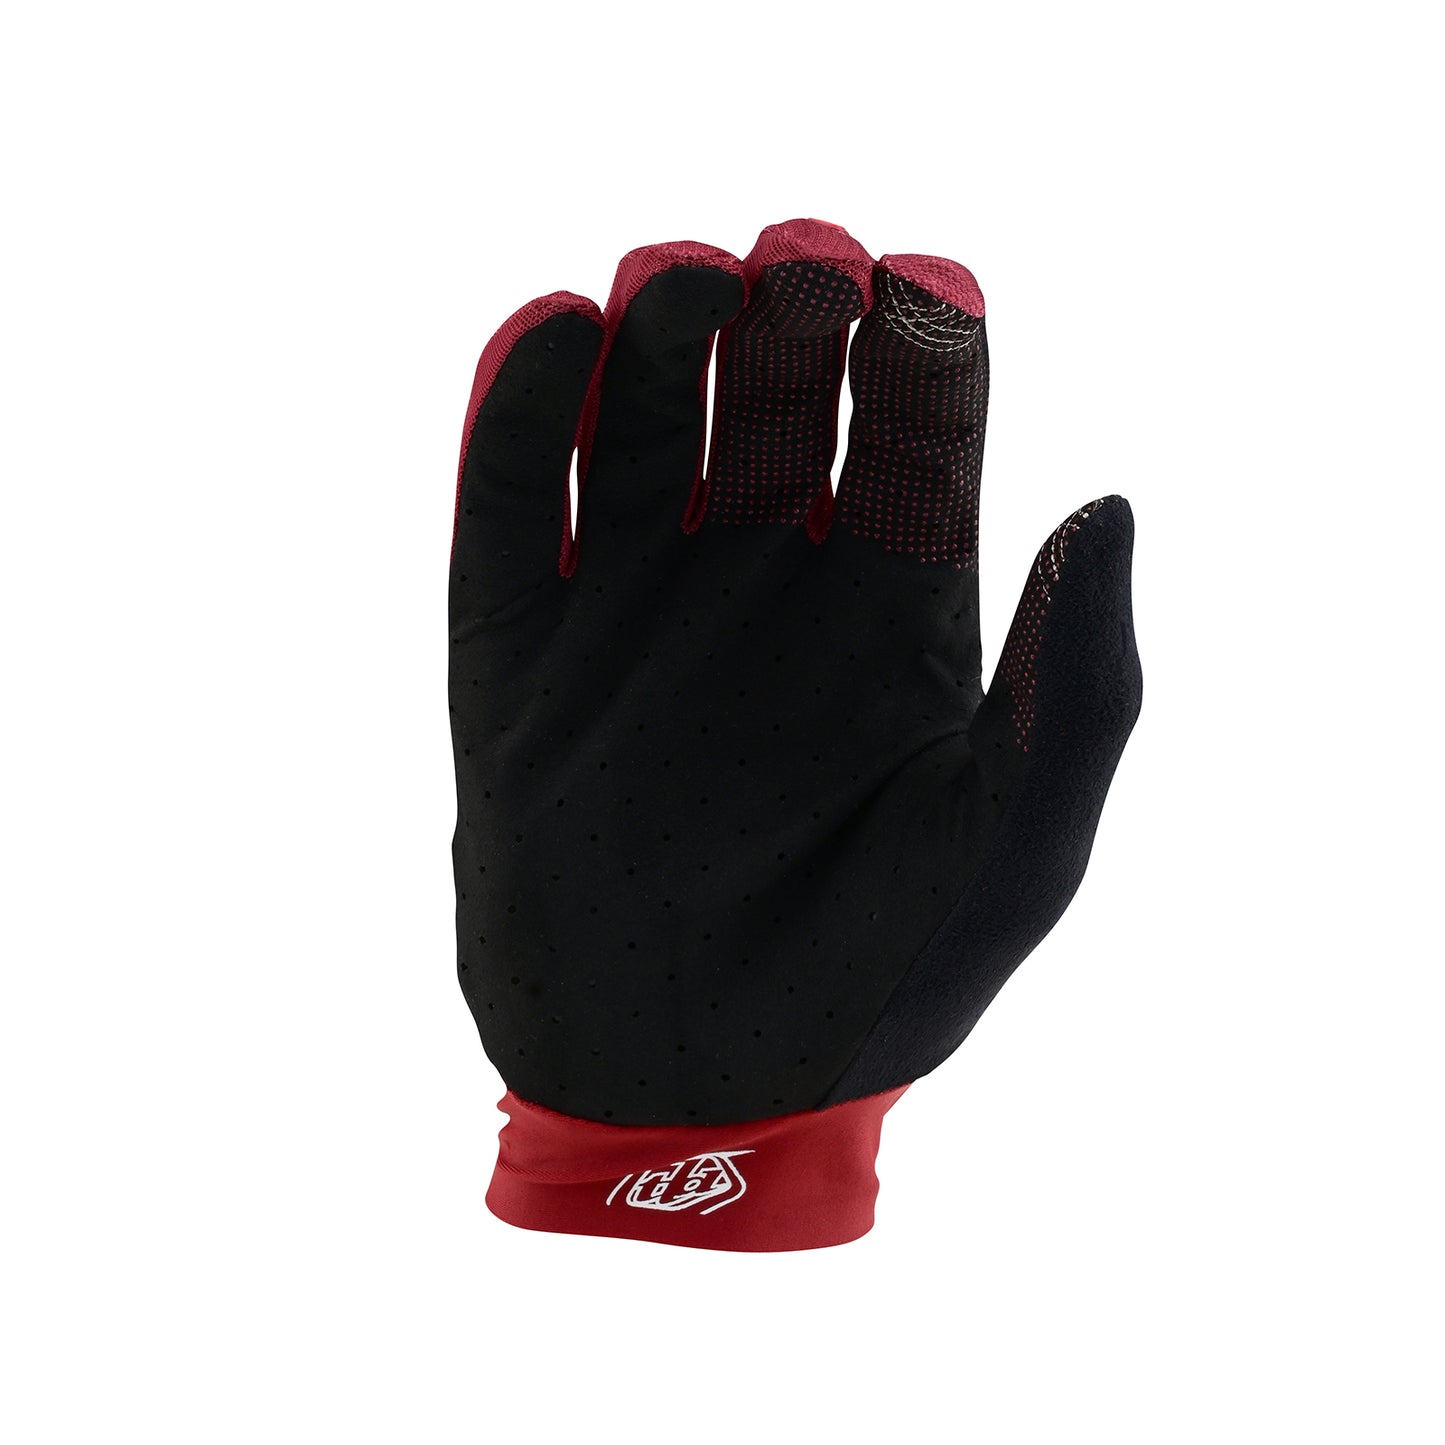 Ace Glove Reverb Race Red